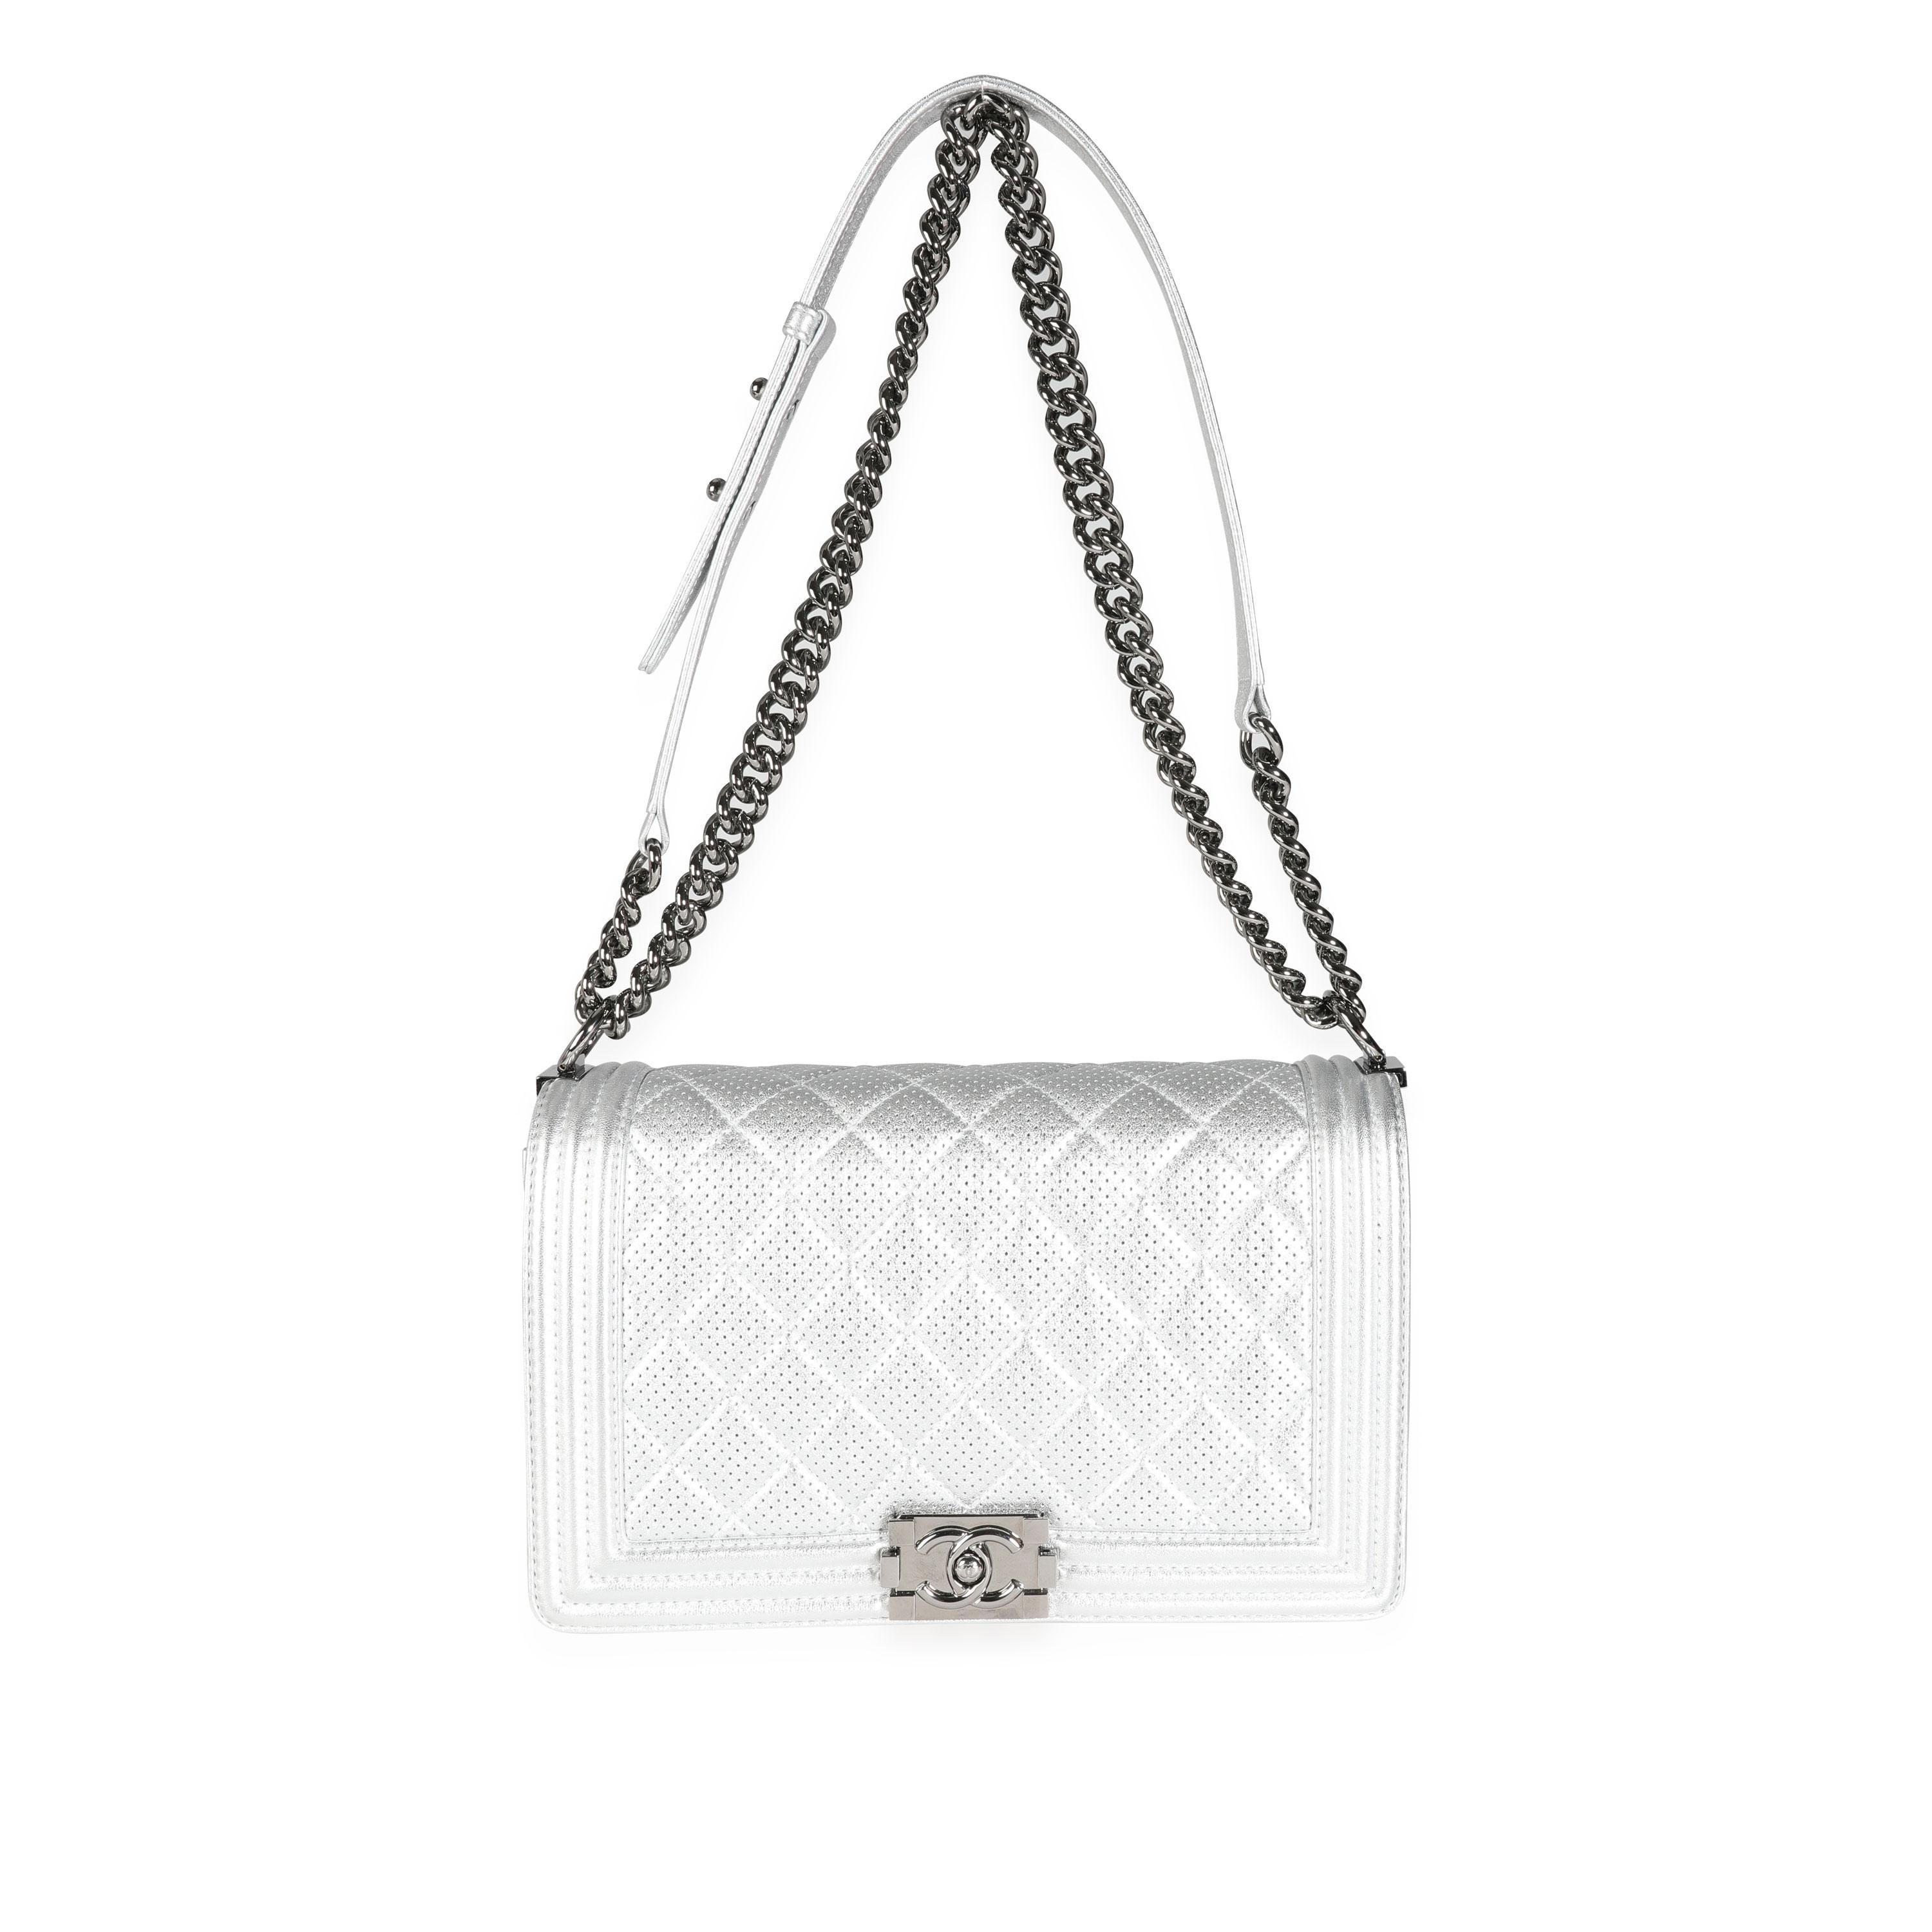 Listing Title: Chanel Silver Metallic Perforated Lambskin Large Boy Bag
SKU: 115454
Condition: Pre-owned (3000)
Handbag Condition: Excellent
Condition Comments: Excellent Condition. Hairline scratches to hardware. No other visible signs of